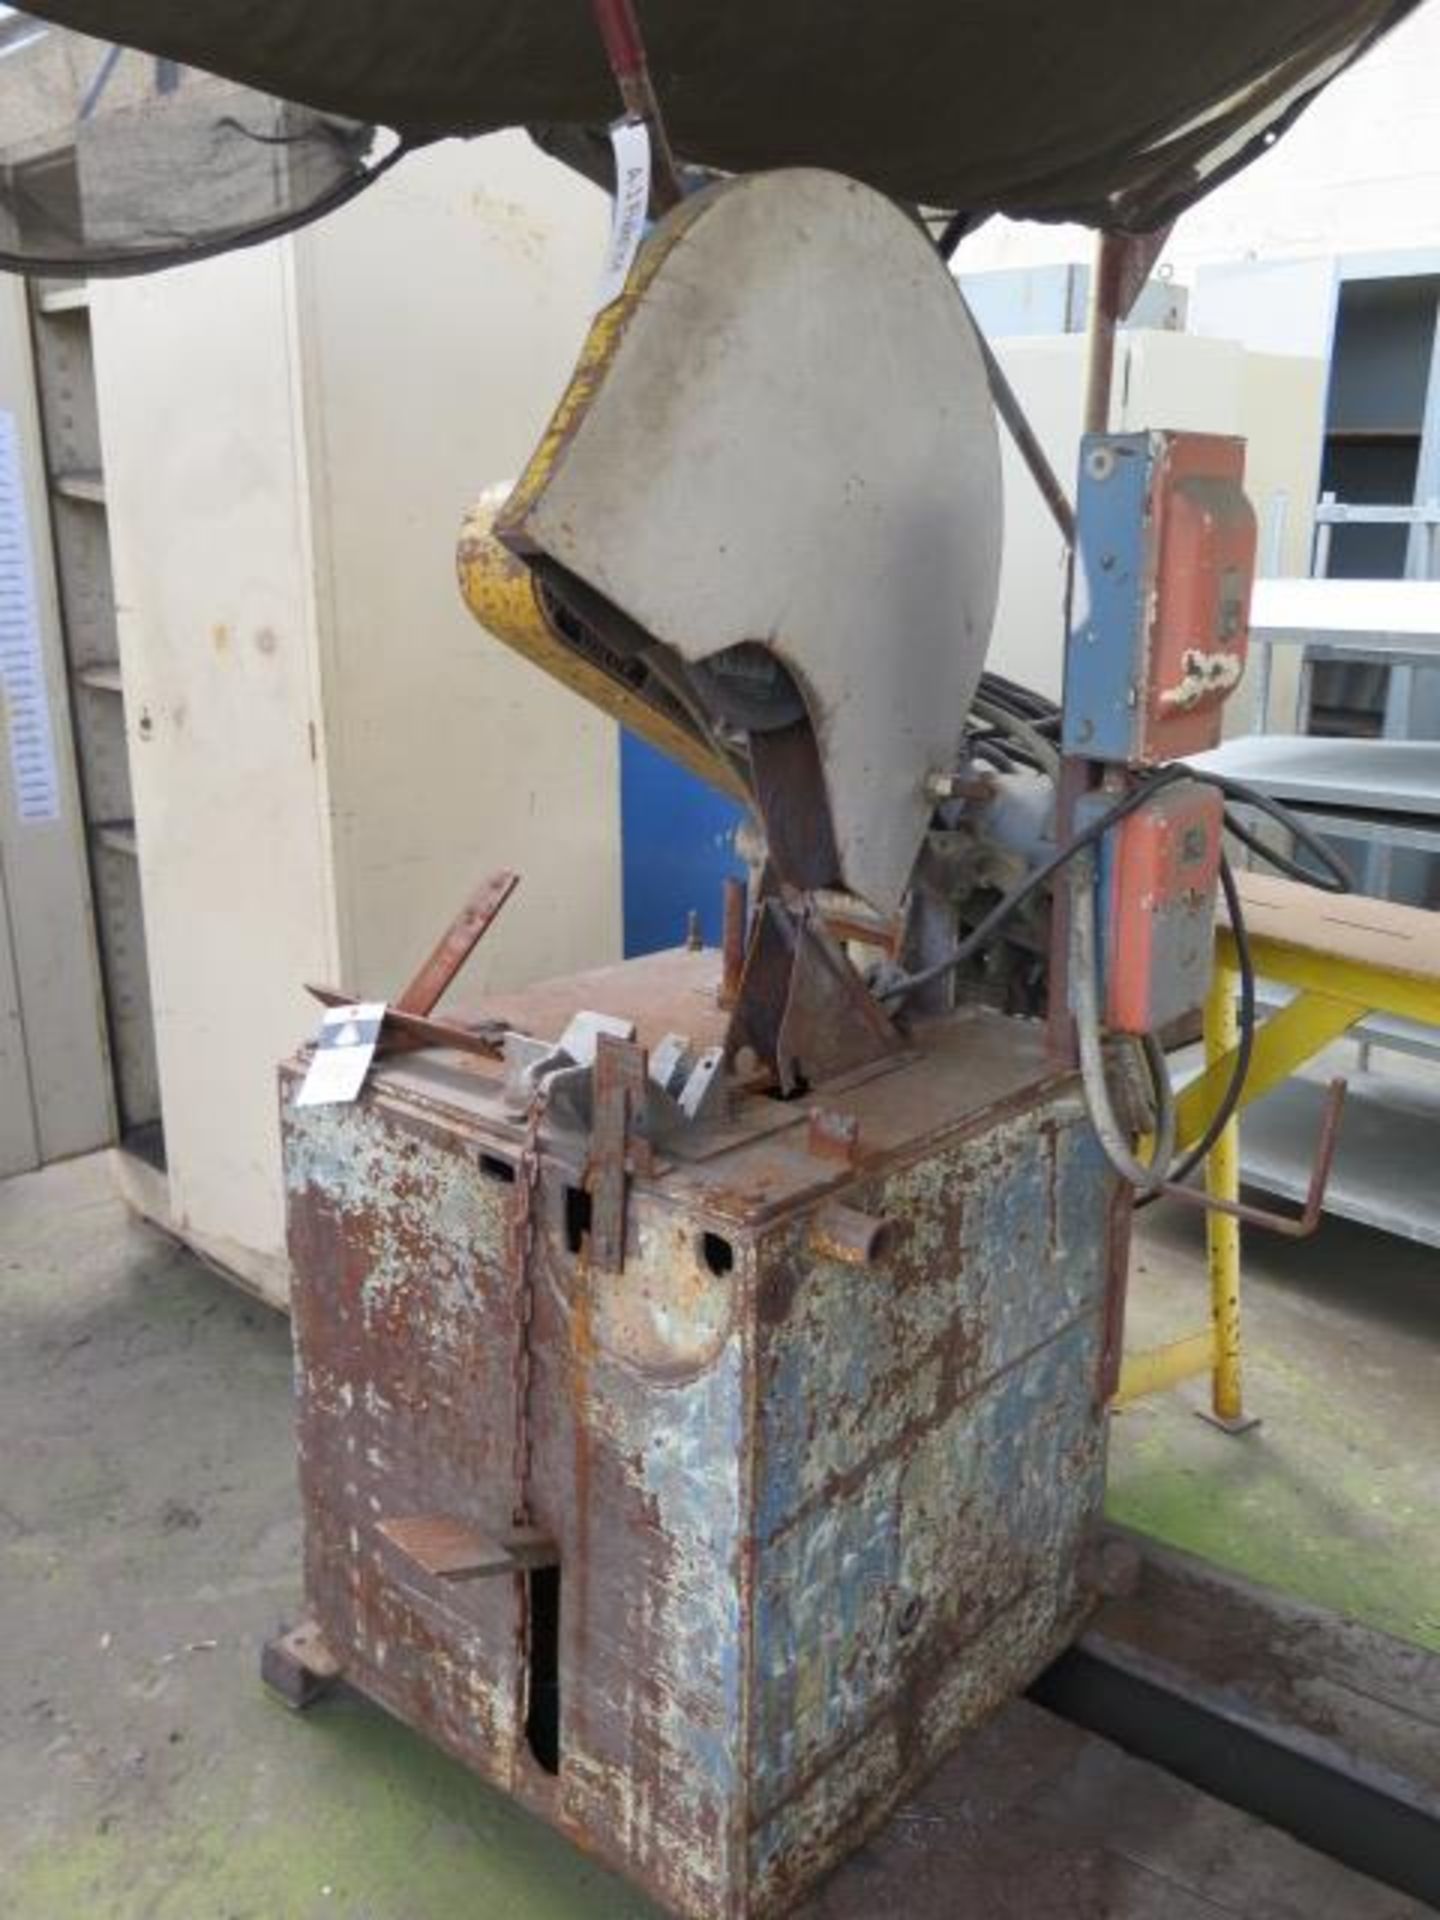 Everett mdl. 20-22 Abrasive Cutoff Saw w/ Chain Vise (SOLD AS-IS - NO WARRANTY) - Image 2 of 5